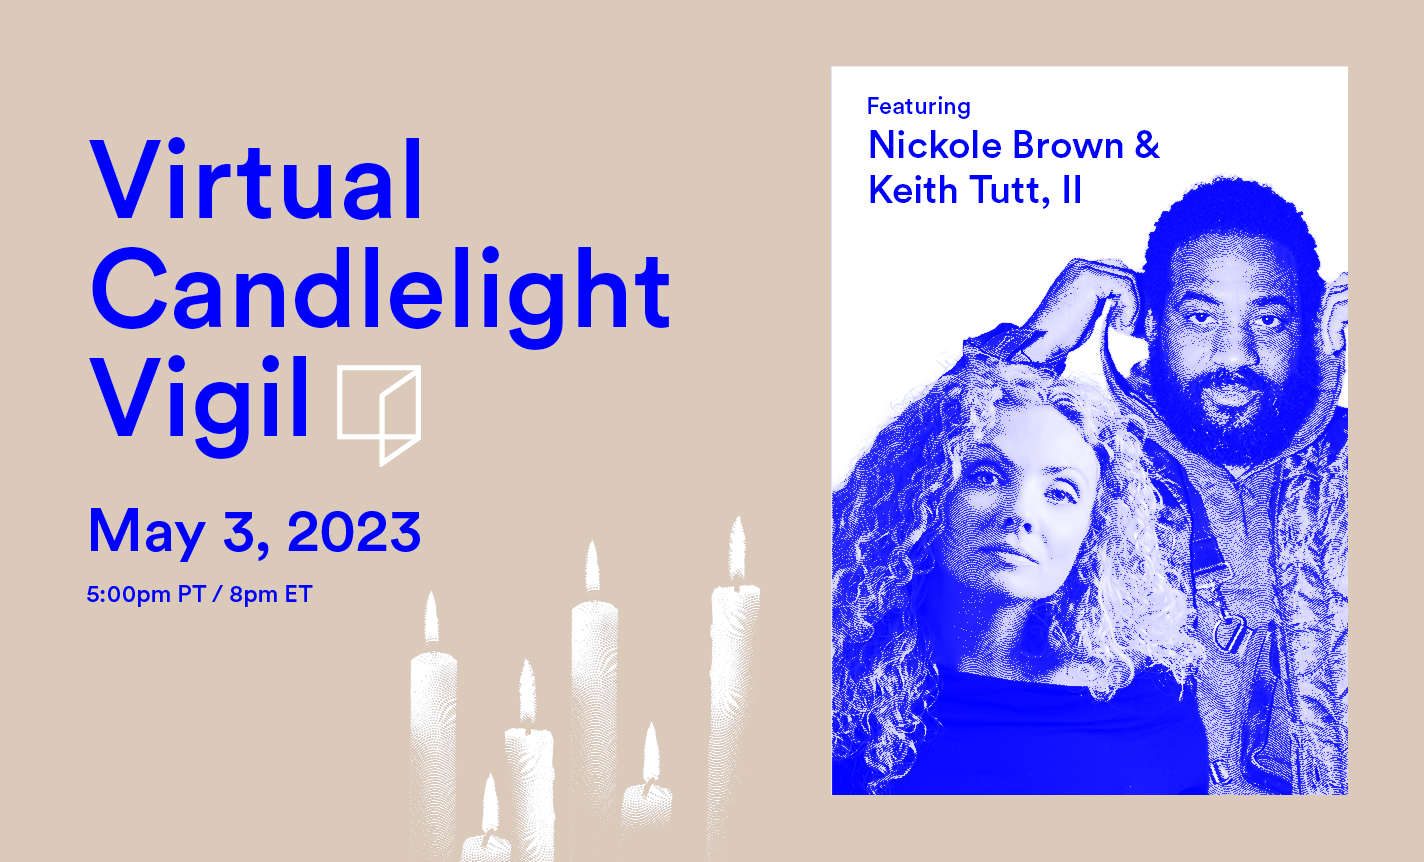 Reimagine Virtual Candlelight Vigil with Nickole Brown and Keith Tutt, II